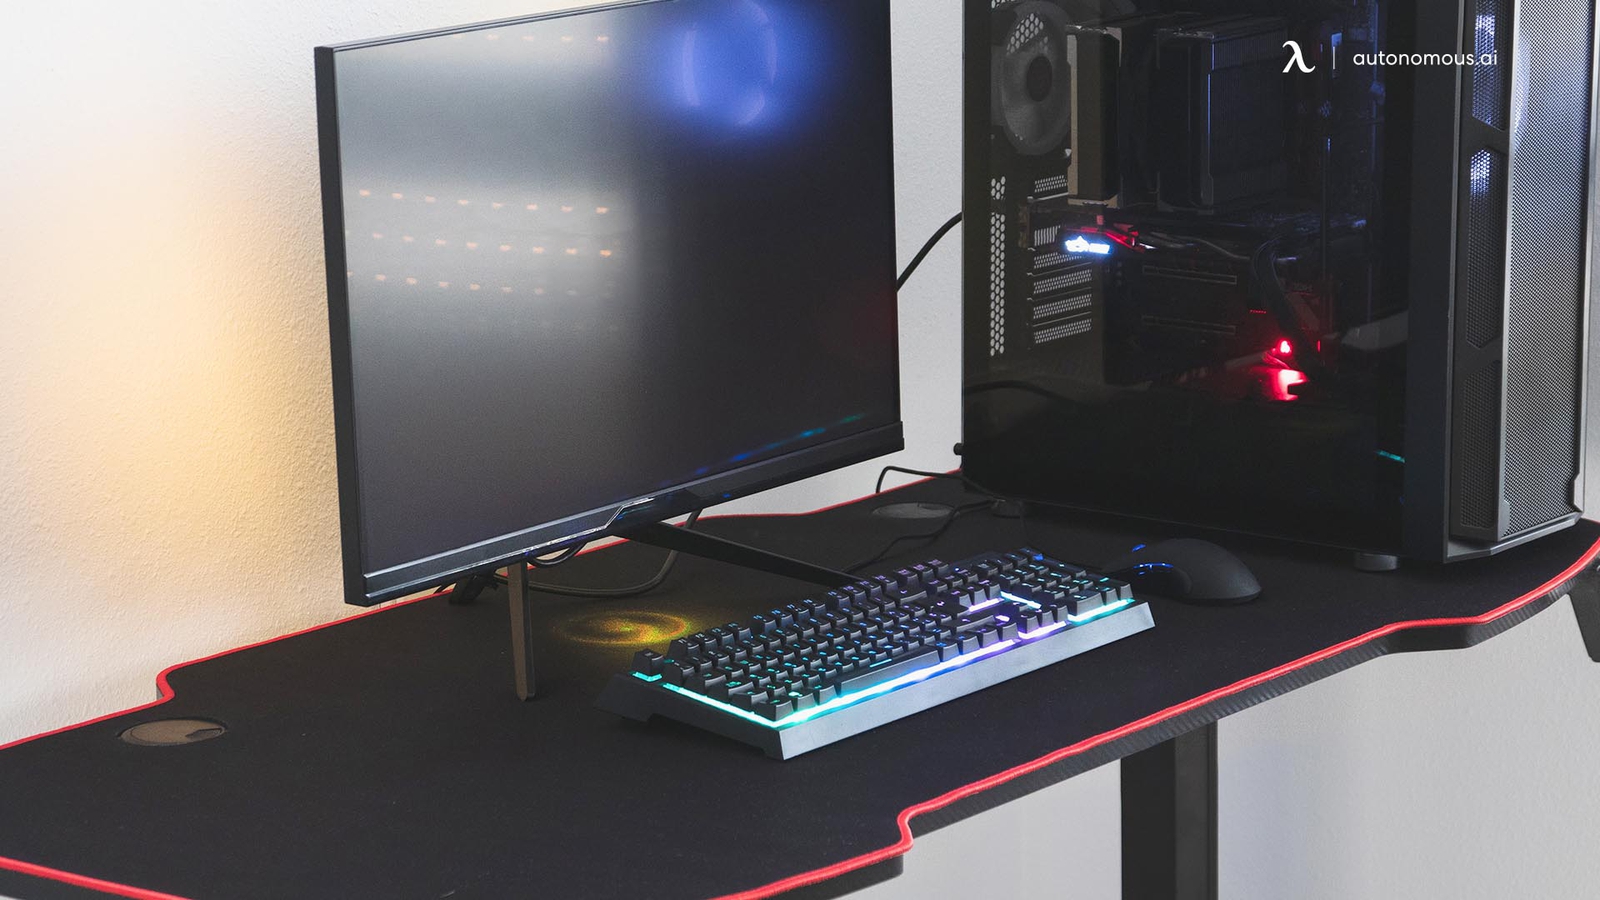 10 Must-Have Adjustable Gaming in the UK for Ergonomics